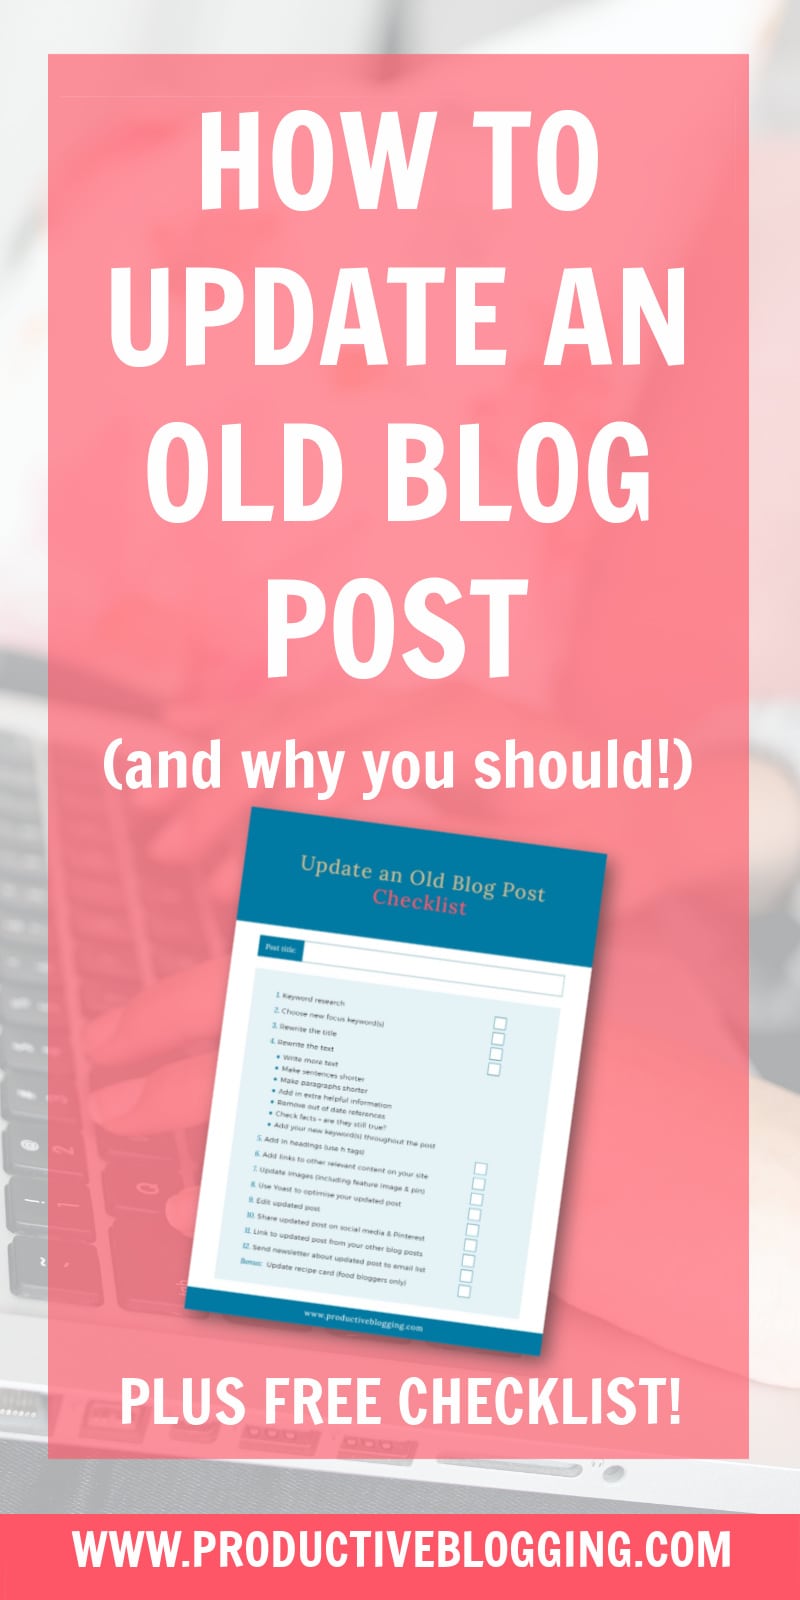 Regularly updating old content is an important part of SEO. Search engines want to send traffic to well-maintained websites. But how do you do it? Here’s how to update an old blog post… plus a handy checklist to work through as you update your old content. #seo #SEOtips #blogupdate #blogpostupdate #blogmaintenance #bloggingtips #bloggrowth #growyourblog #SEOhacks #blogginghacks #searchengineoptimisation #searchengineoptimization #SEOforBloggers #searchenginetraffic #productiveblogging